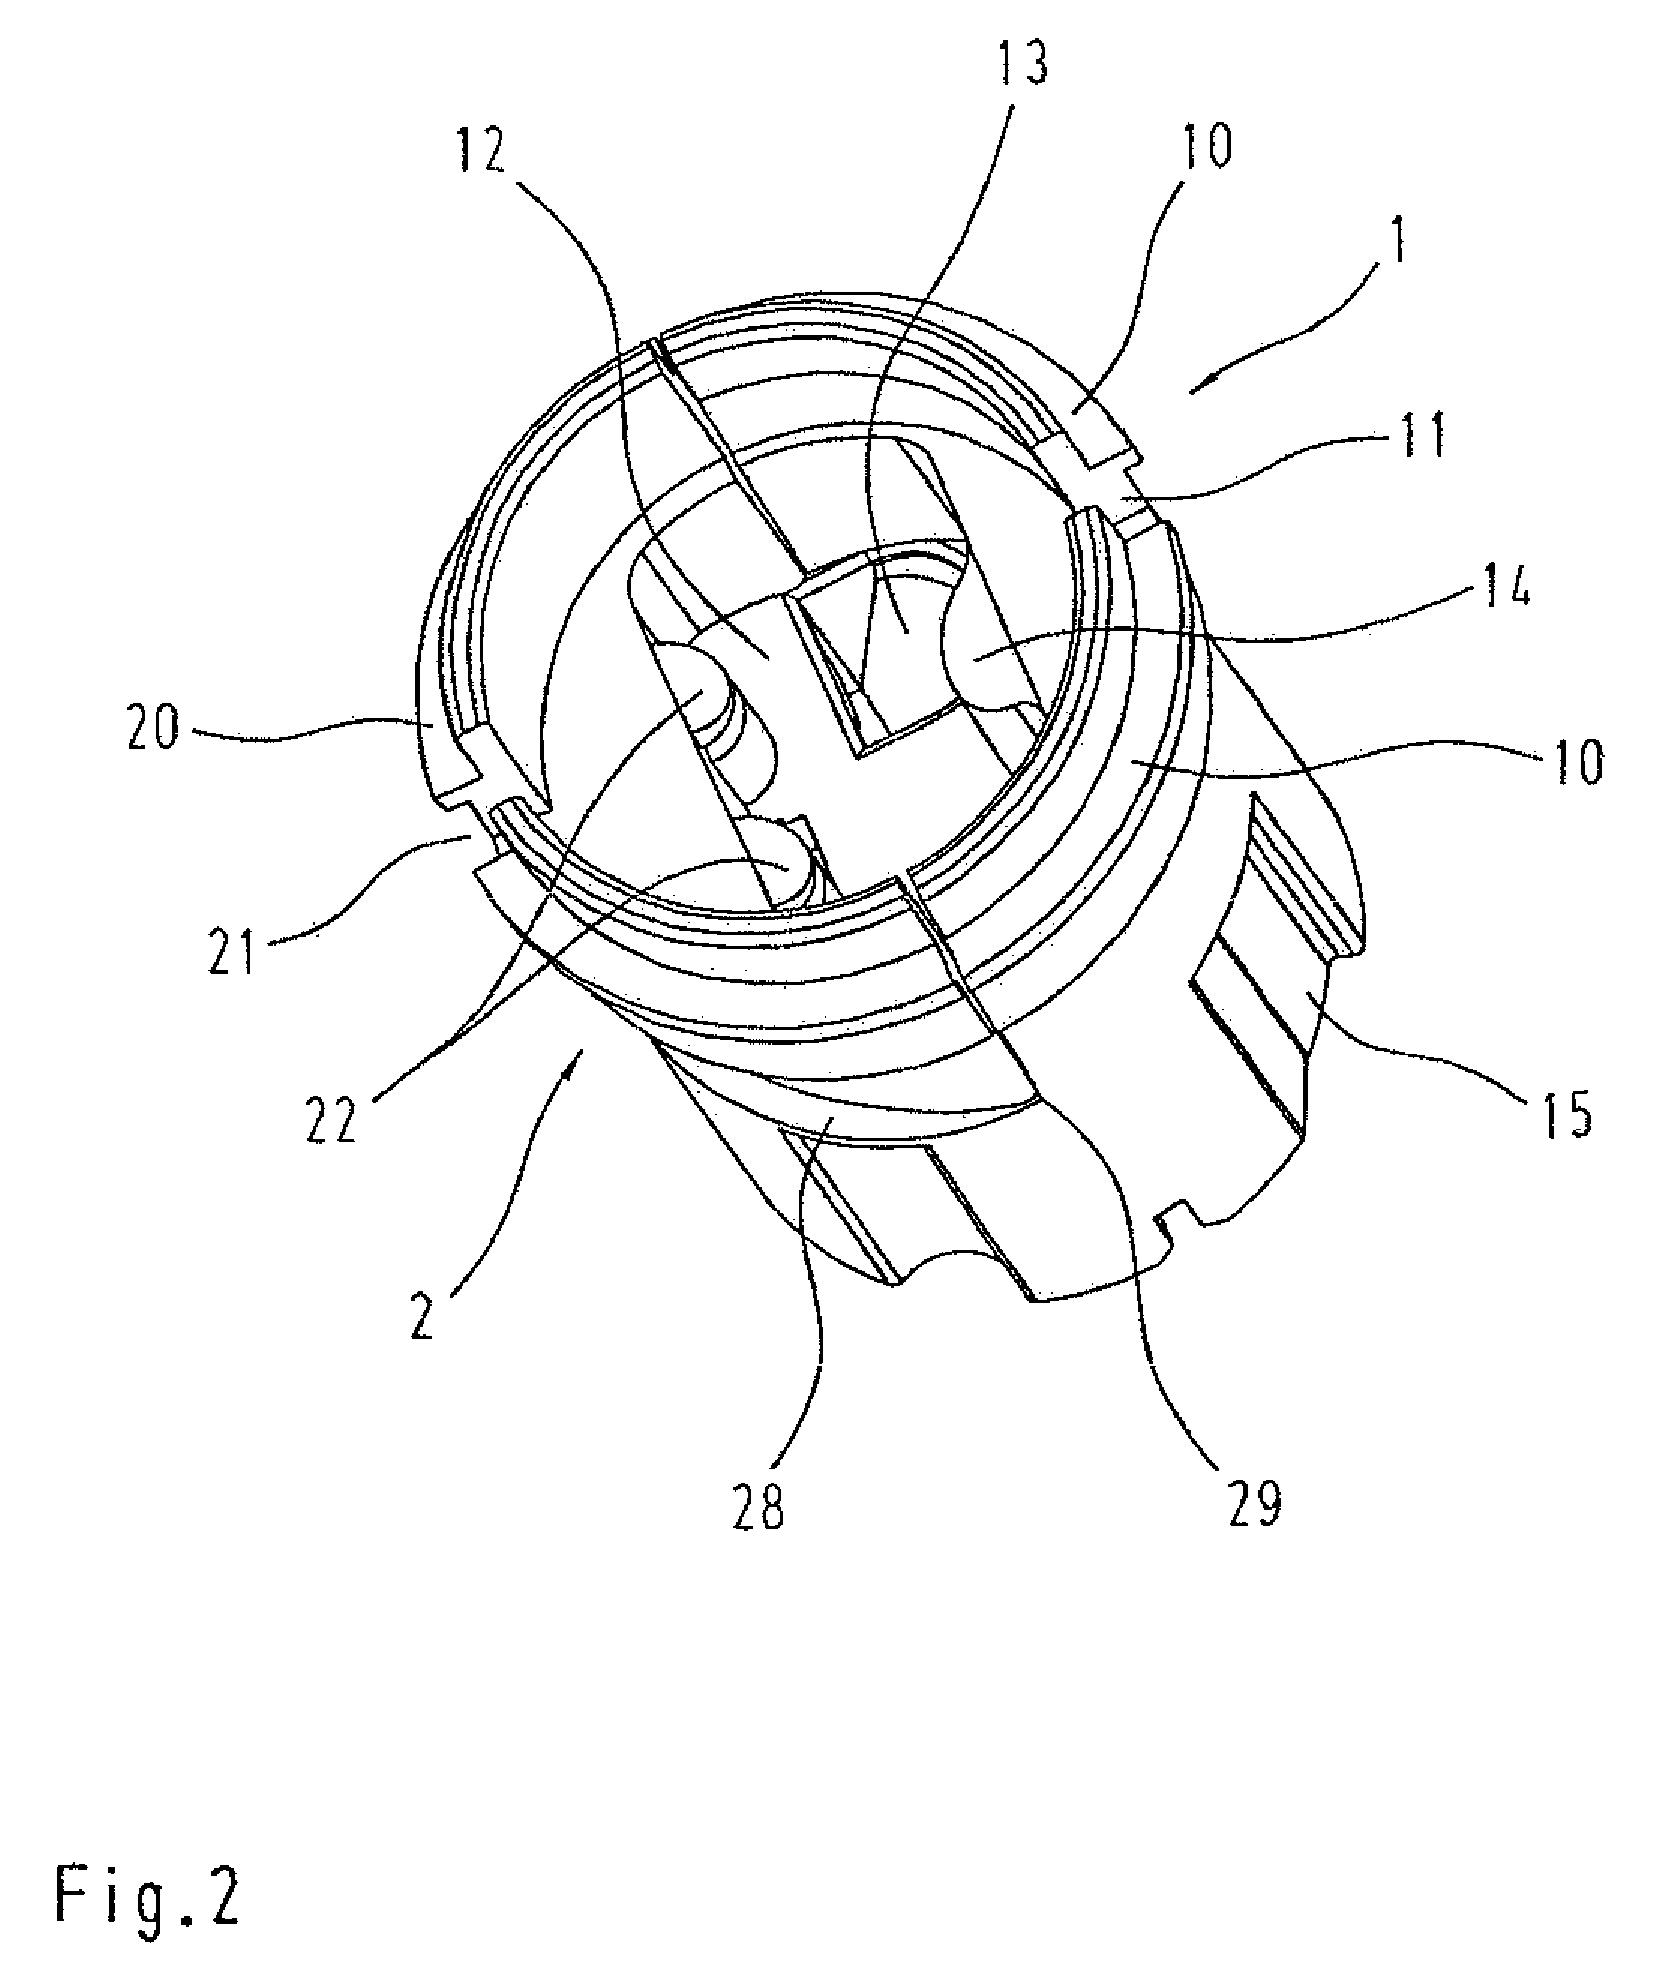 Contact element for shielded connectors